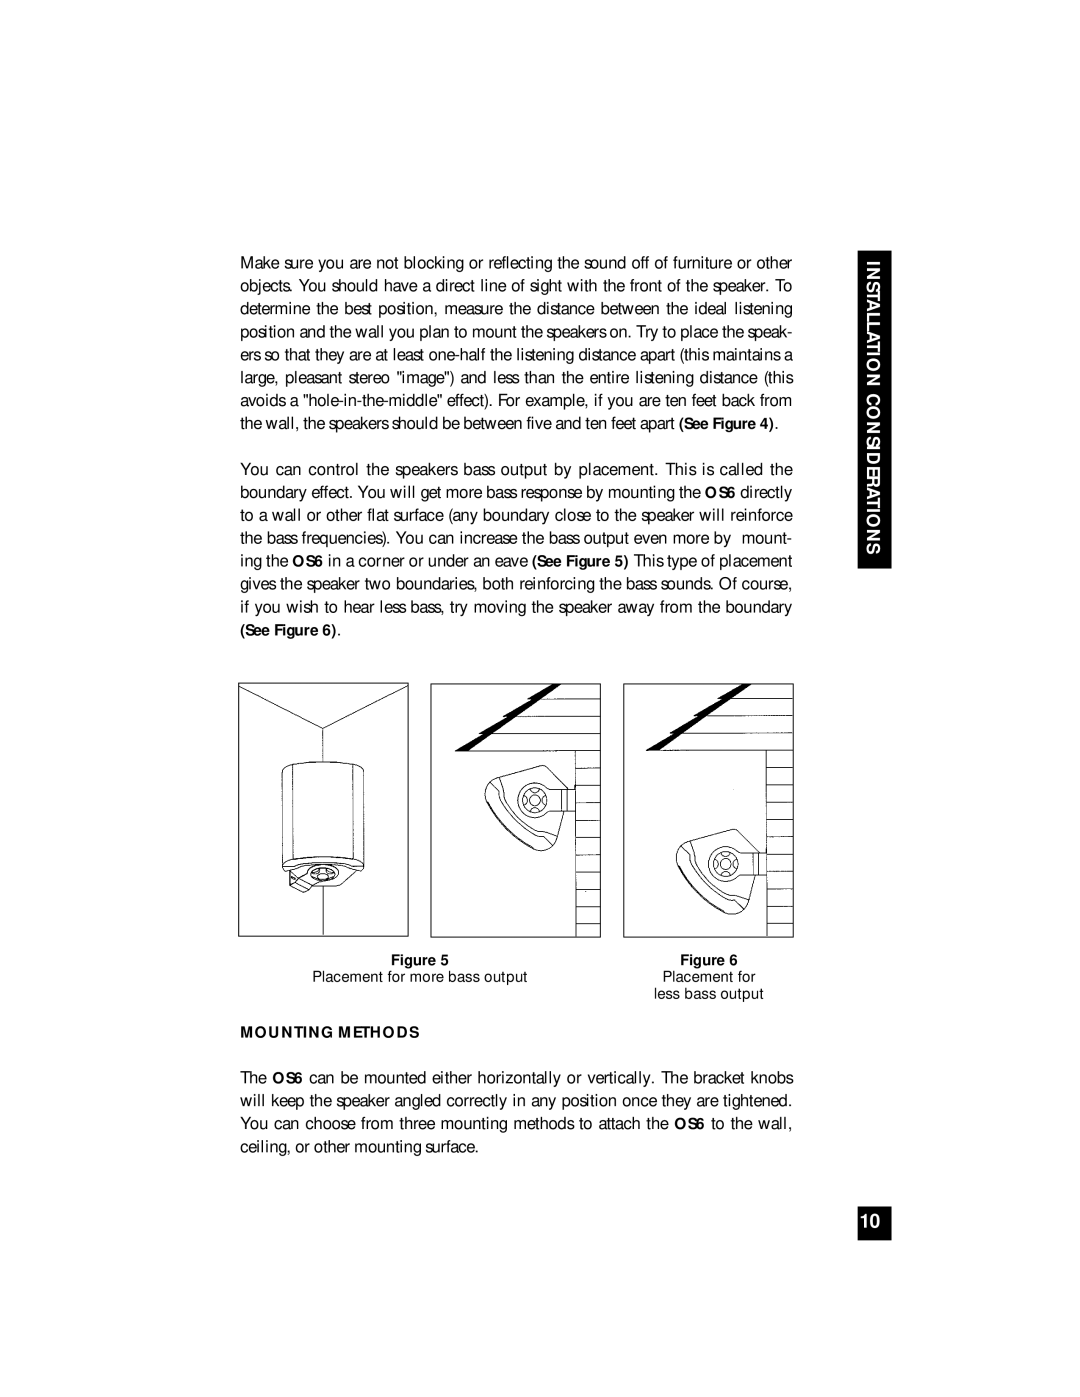 Niles Audio OS6 manual See Figure, Mounting Methods, Installation Considerations 